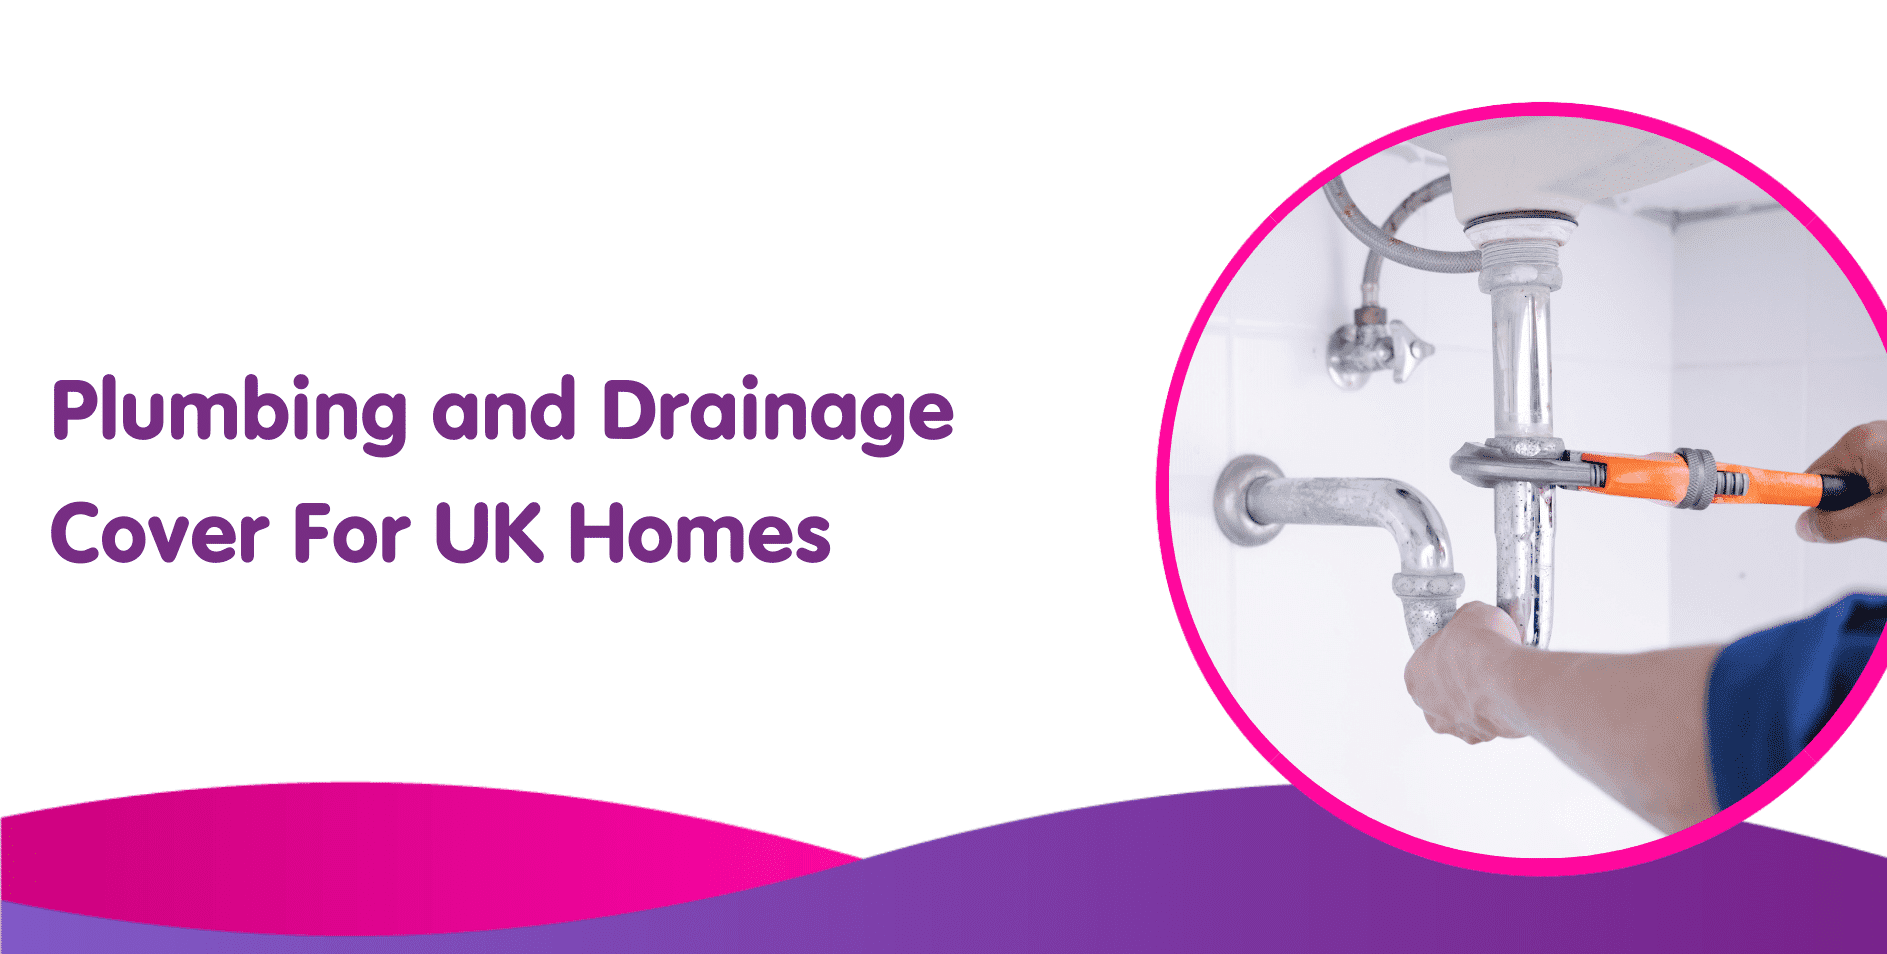 Plumbing and Drainage Cover For UK Homes